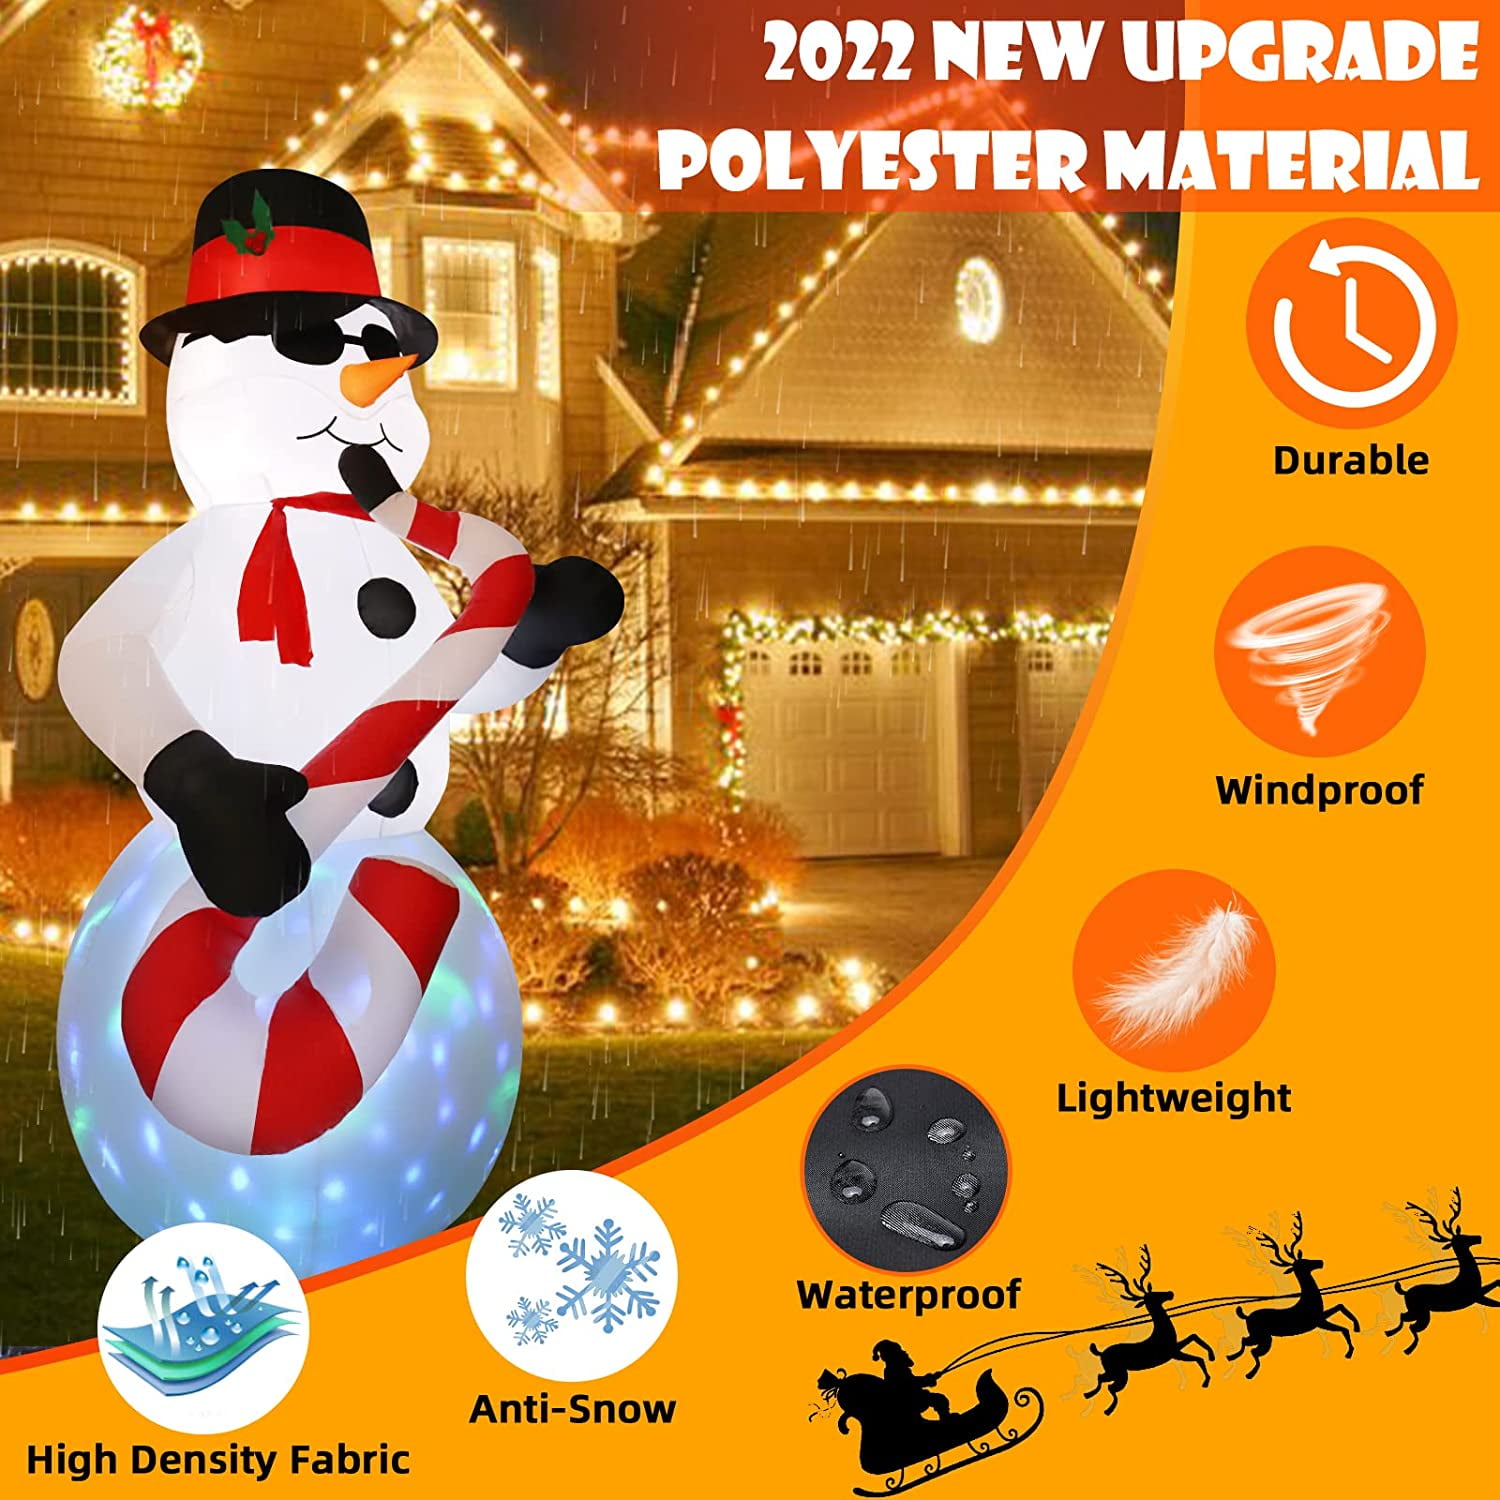 FT Christmas Inflatables Snowman Outdoor Christmas Decorations, Snowman  Decorations Blow Up Yard Decorations Built-in Colorful Rotating LED Lights  for Lawn, Garden